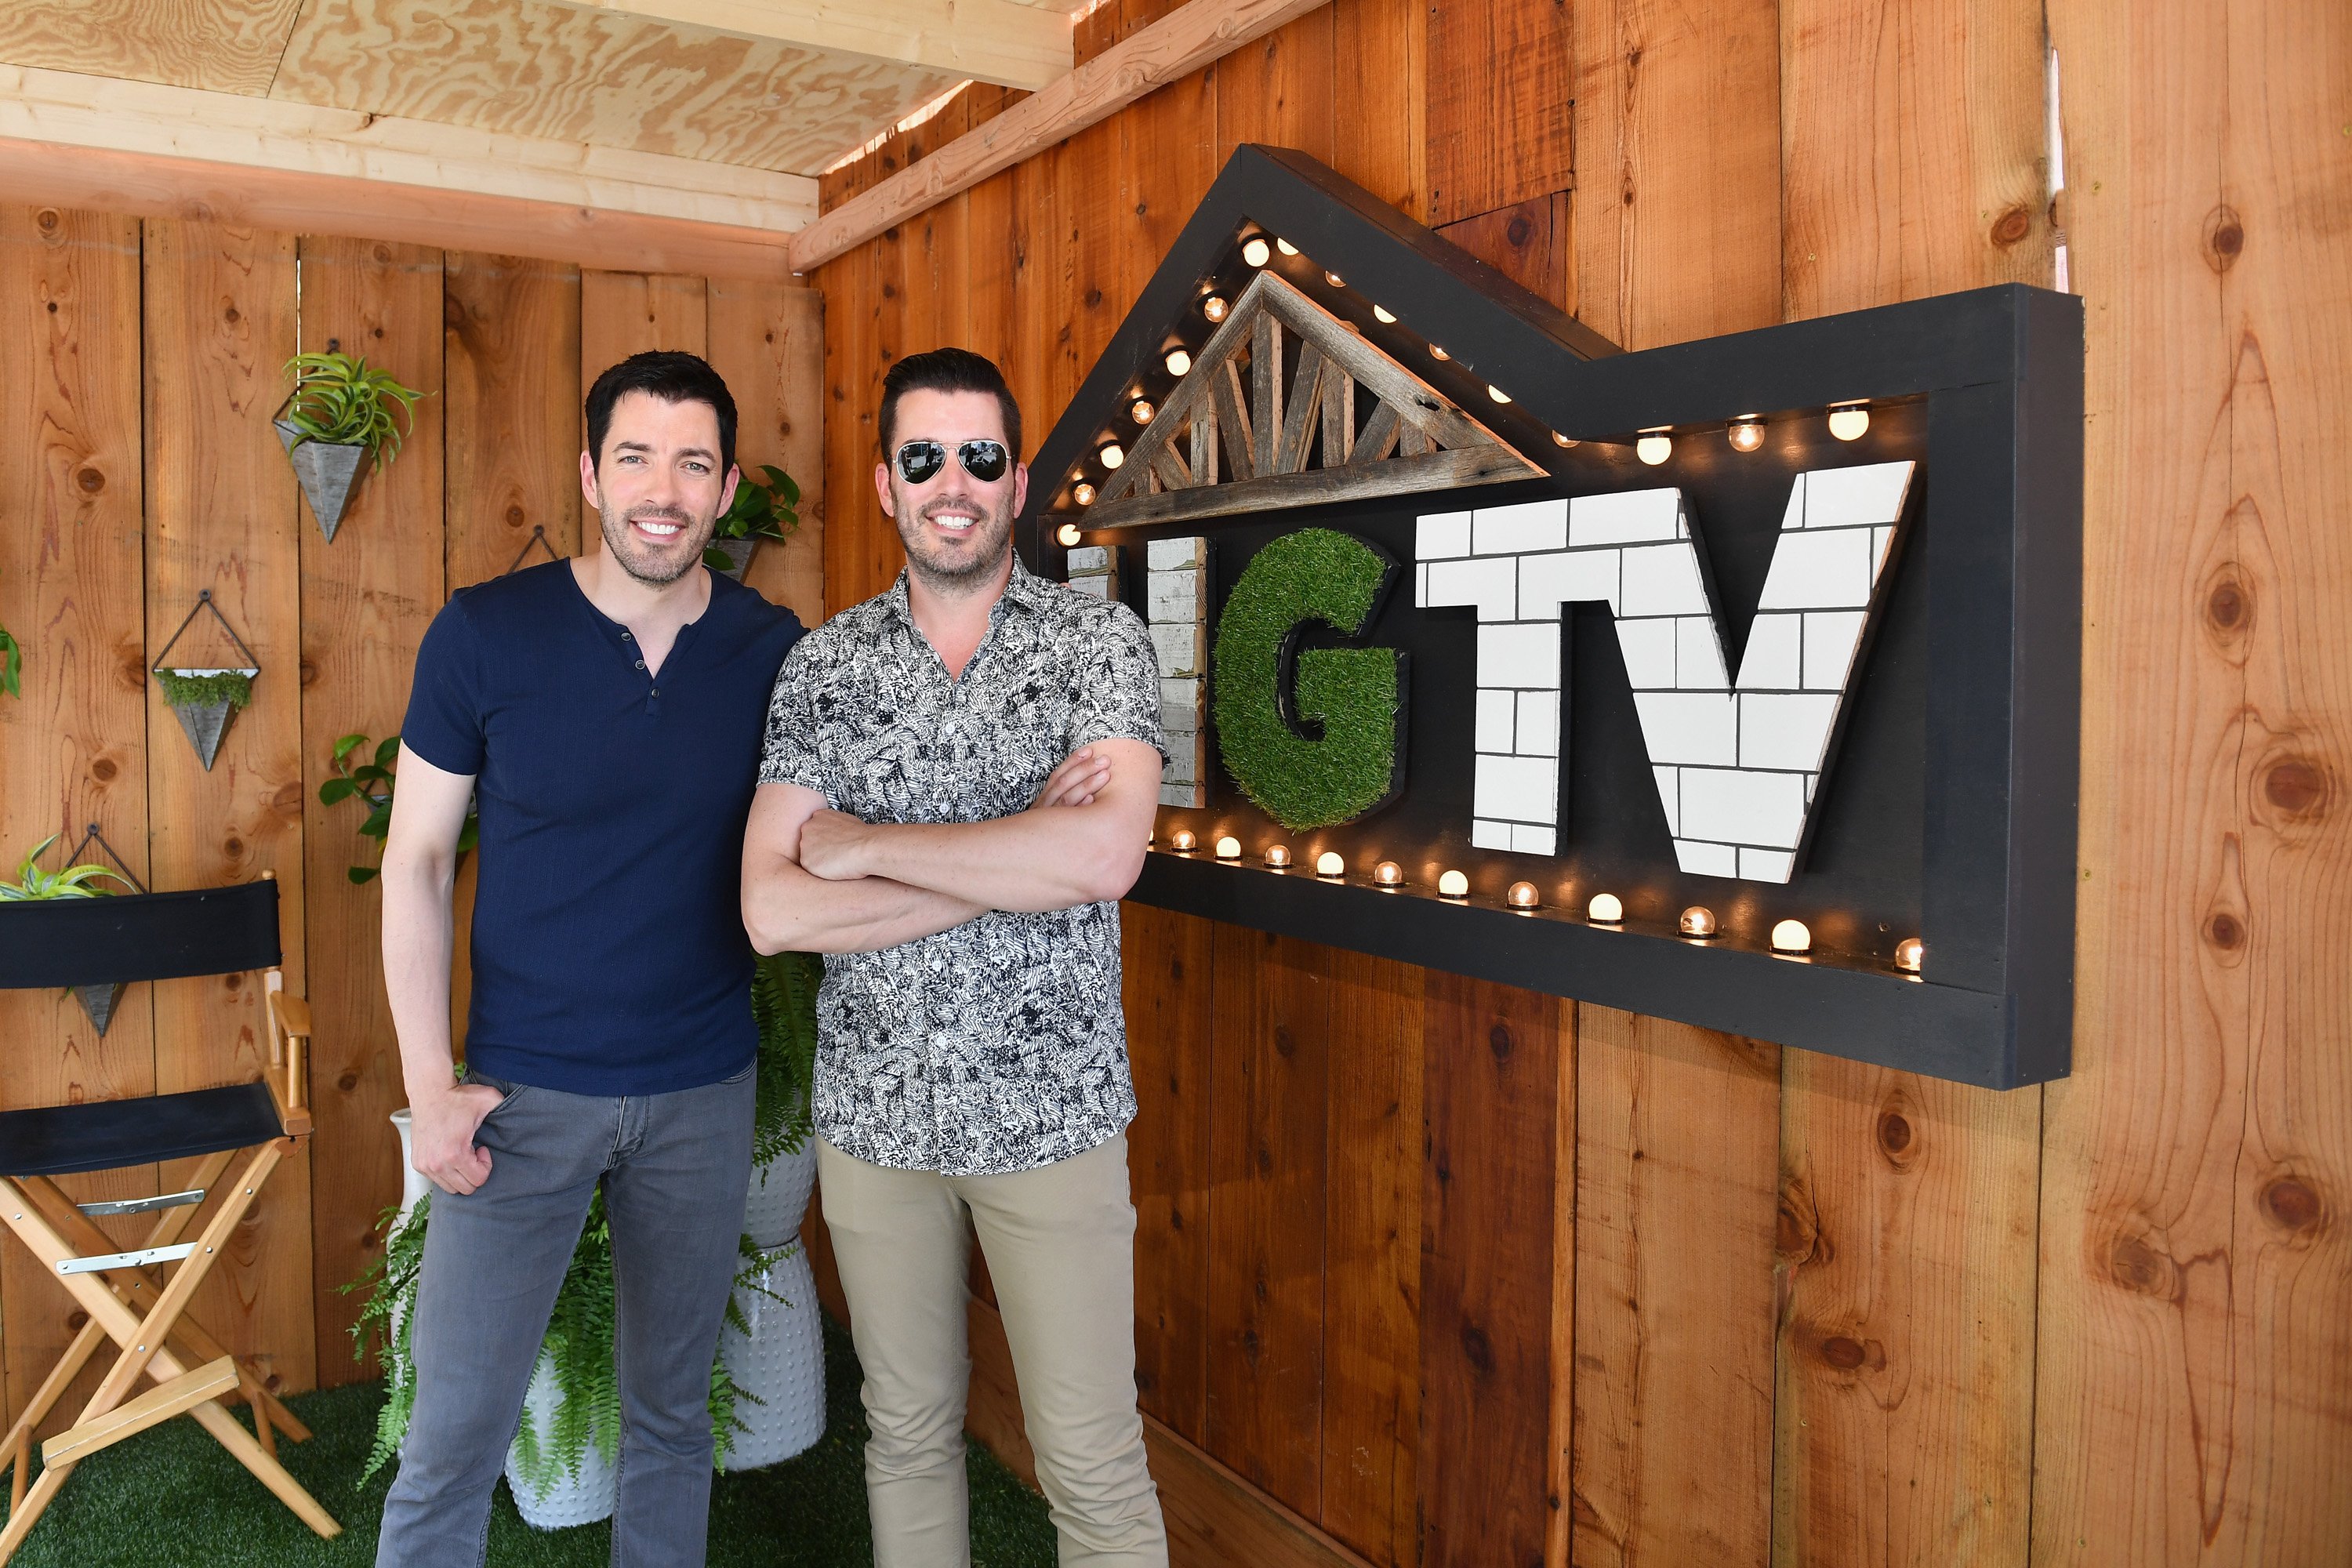 Drew and Jonathan Scott attend the HGTV Lodge at CMA Music Fest in Nashville, Tennessee on June 9, 2018 | Photo: Getty Images